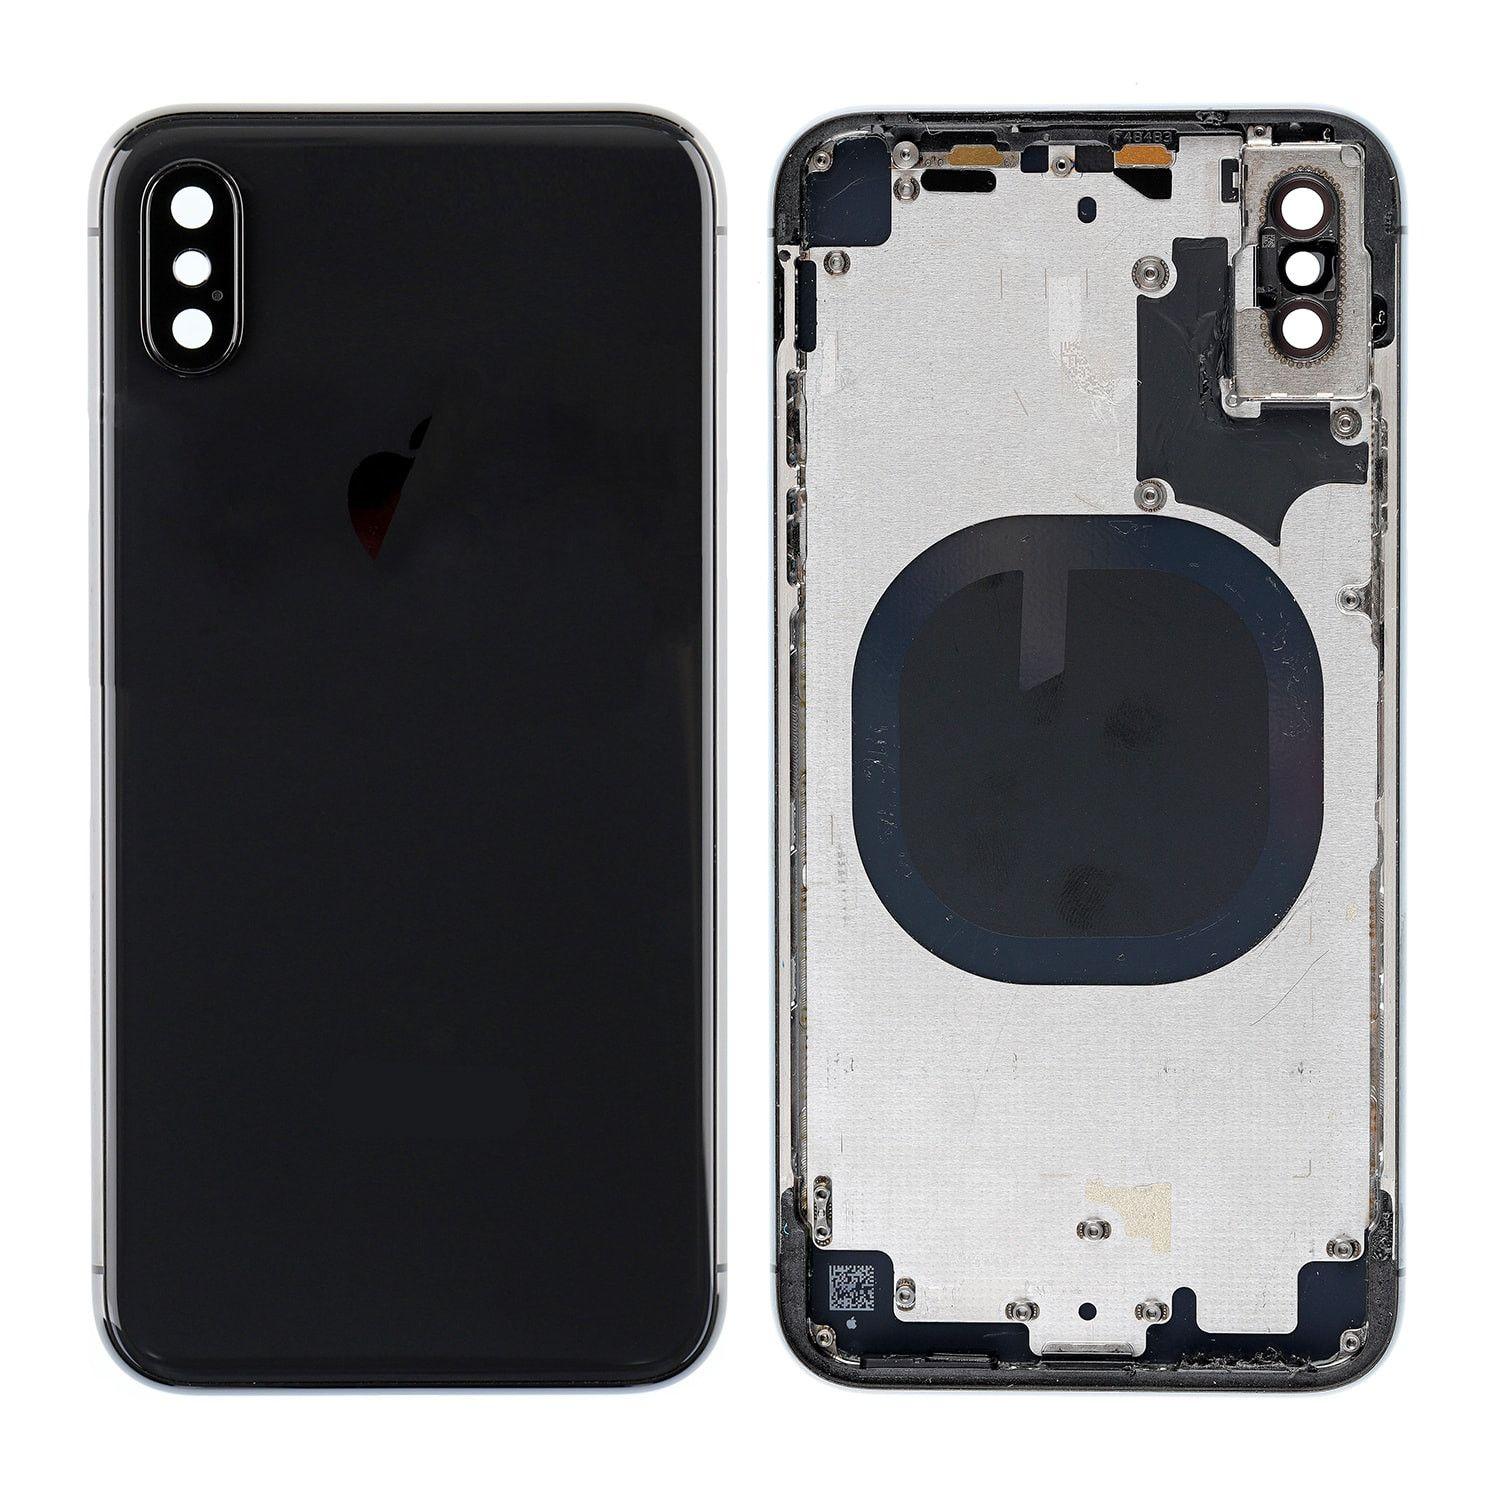 Body for iPhone X + back cover black